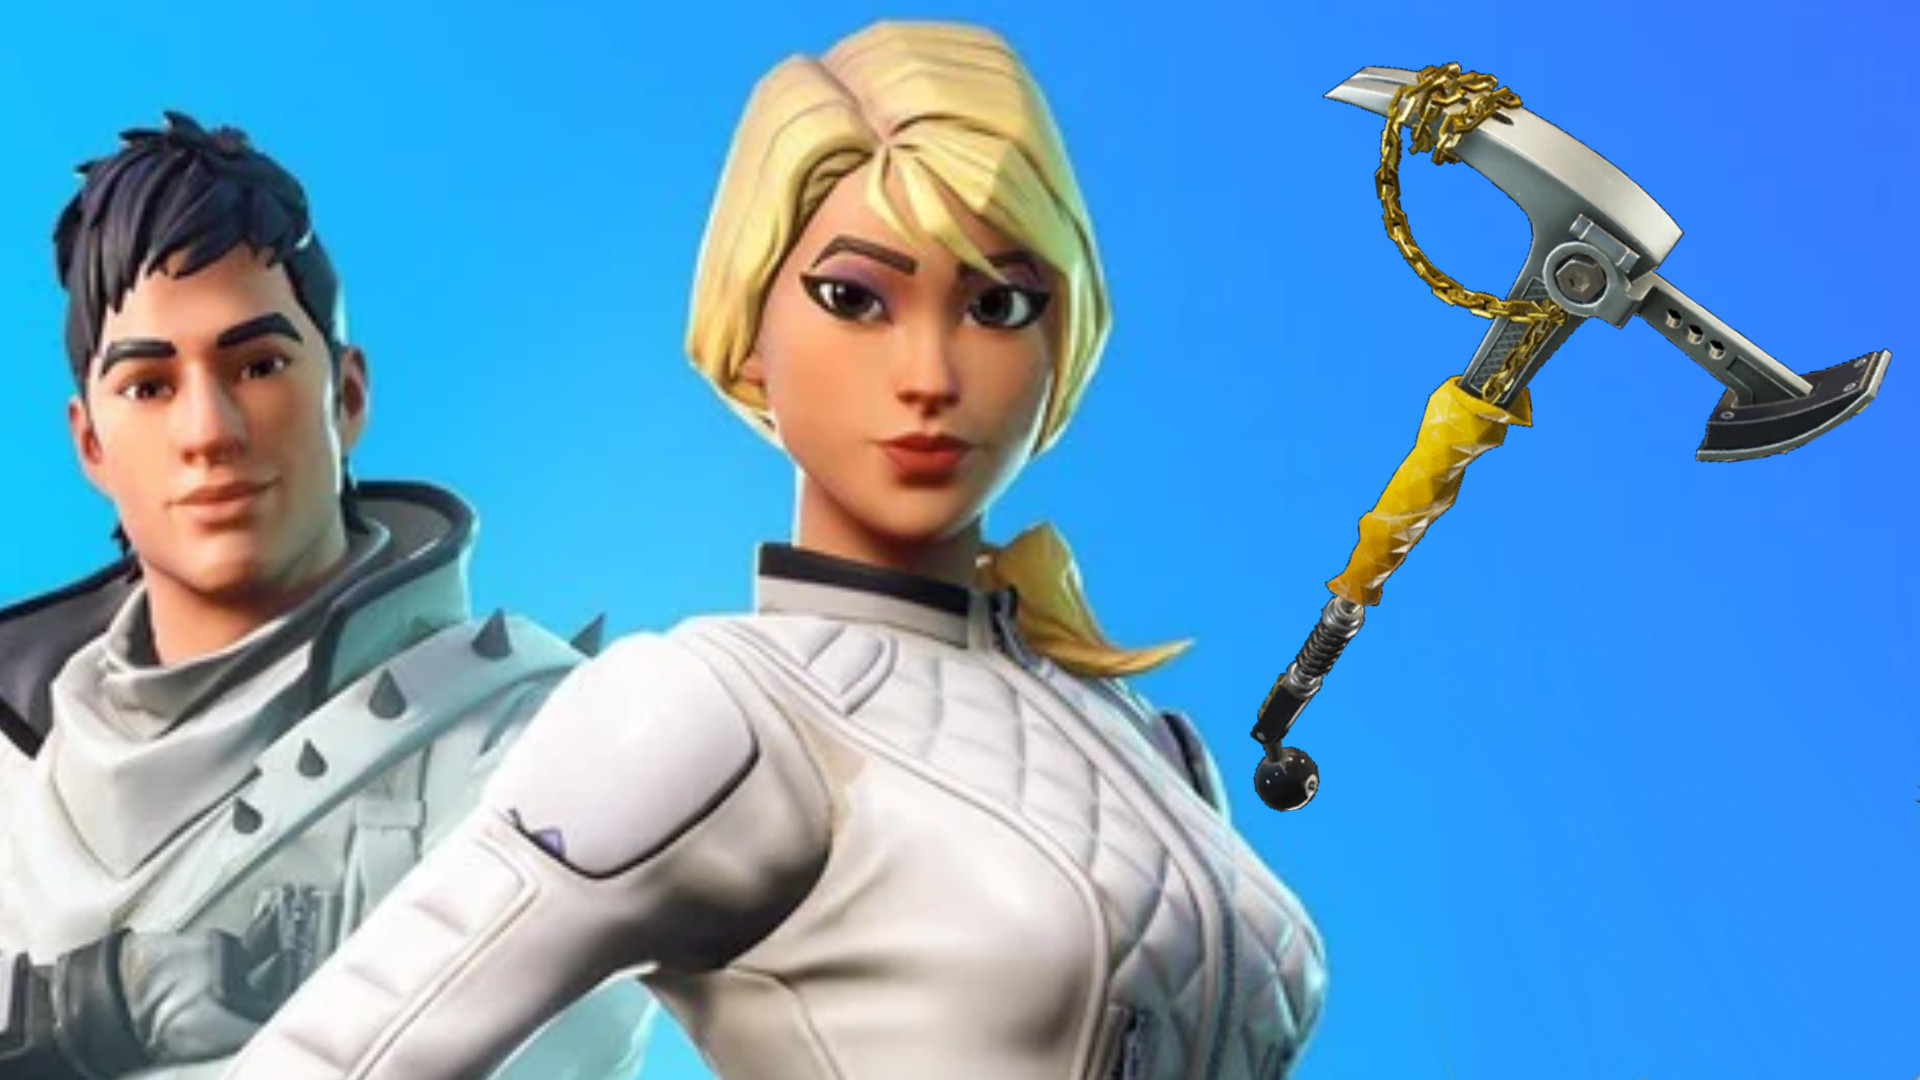 Fortnite item shop error leads to compensation from Epic Games